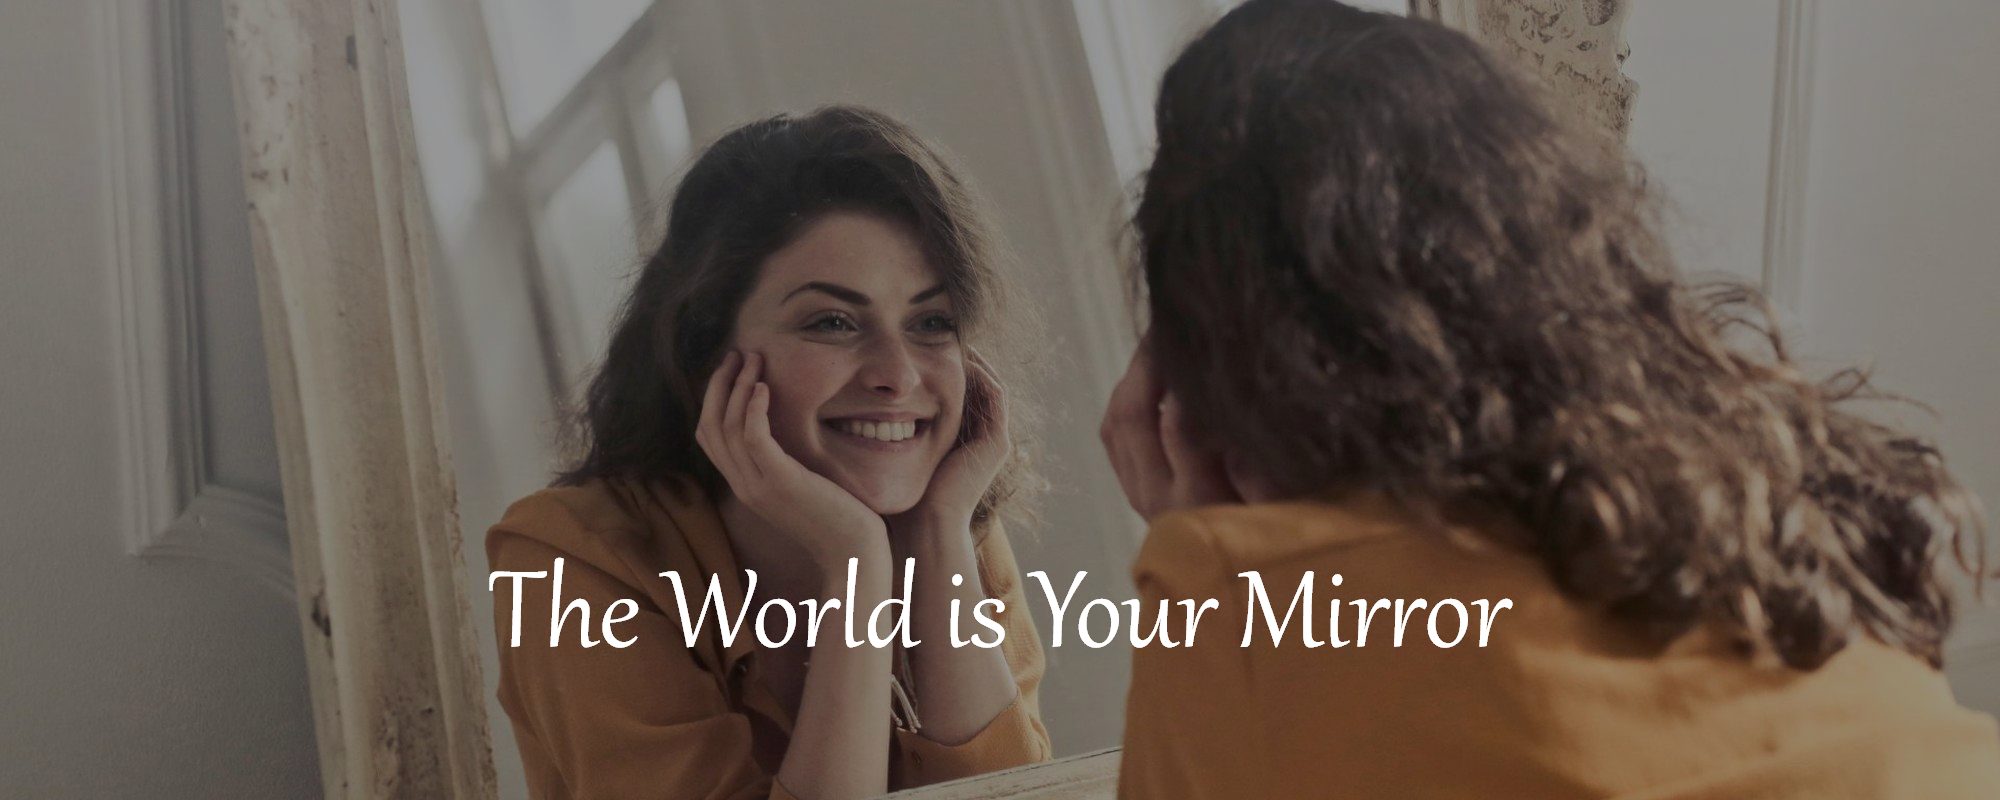 your-world-is-your-mirror-meaning-life-is-a-holographic-projection-reflection-of-your-thoughts-beliefs-science-application